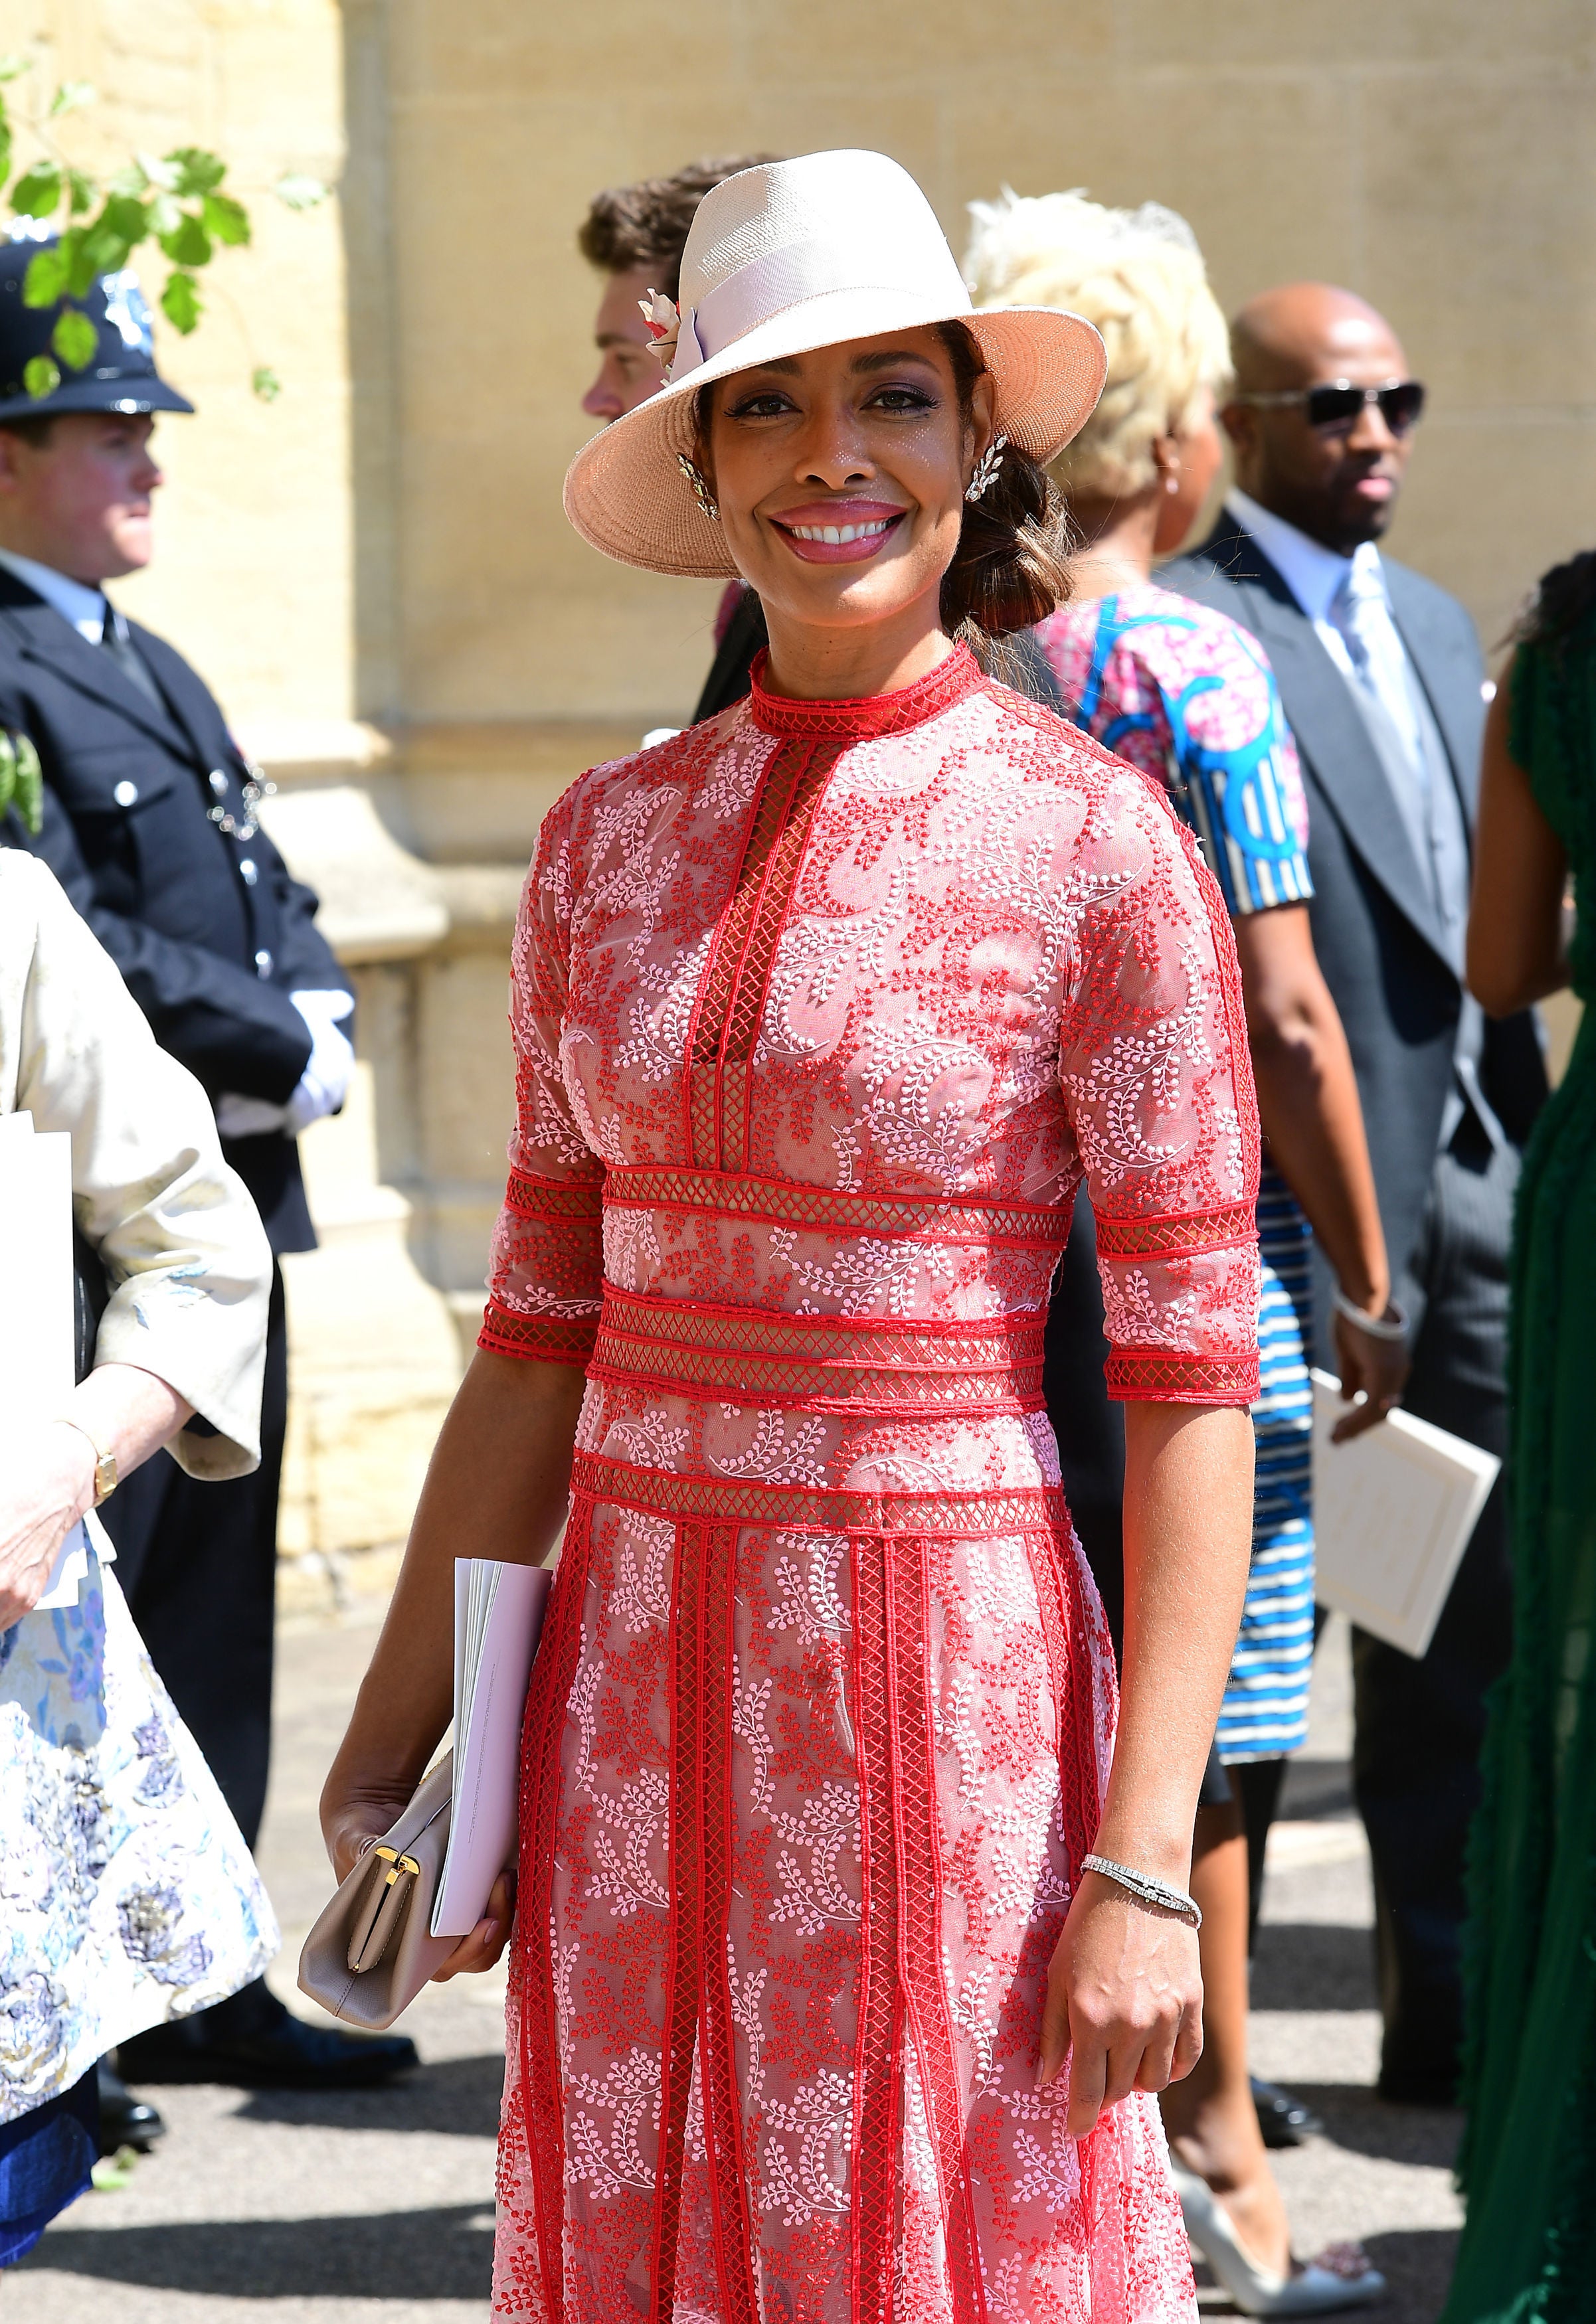 The Royal Wedding Celebrity Guest List Was Filled With Black Excellence